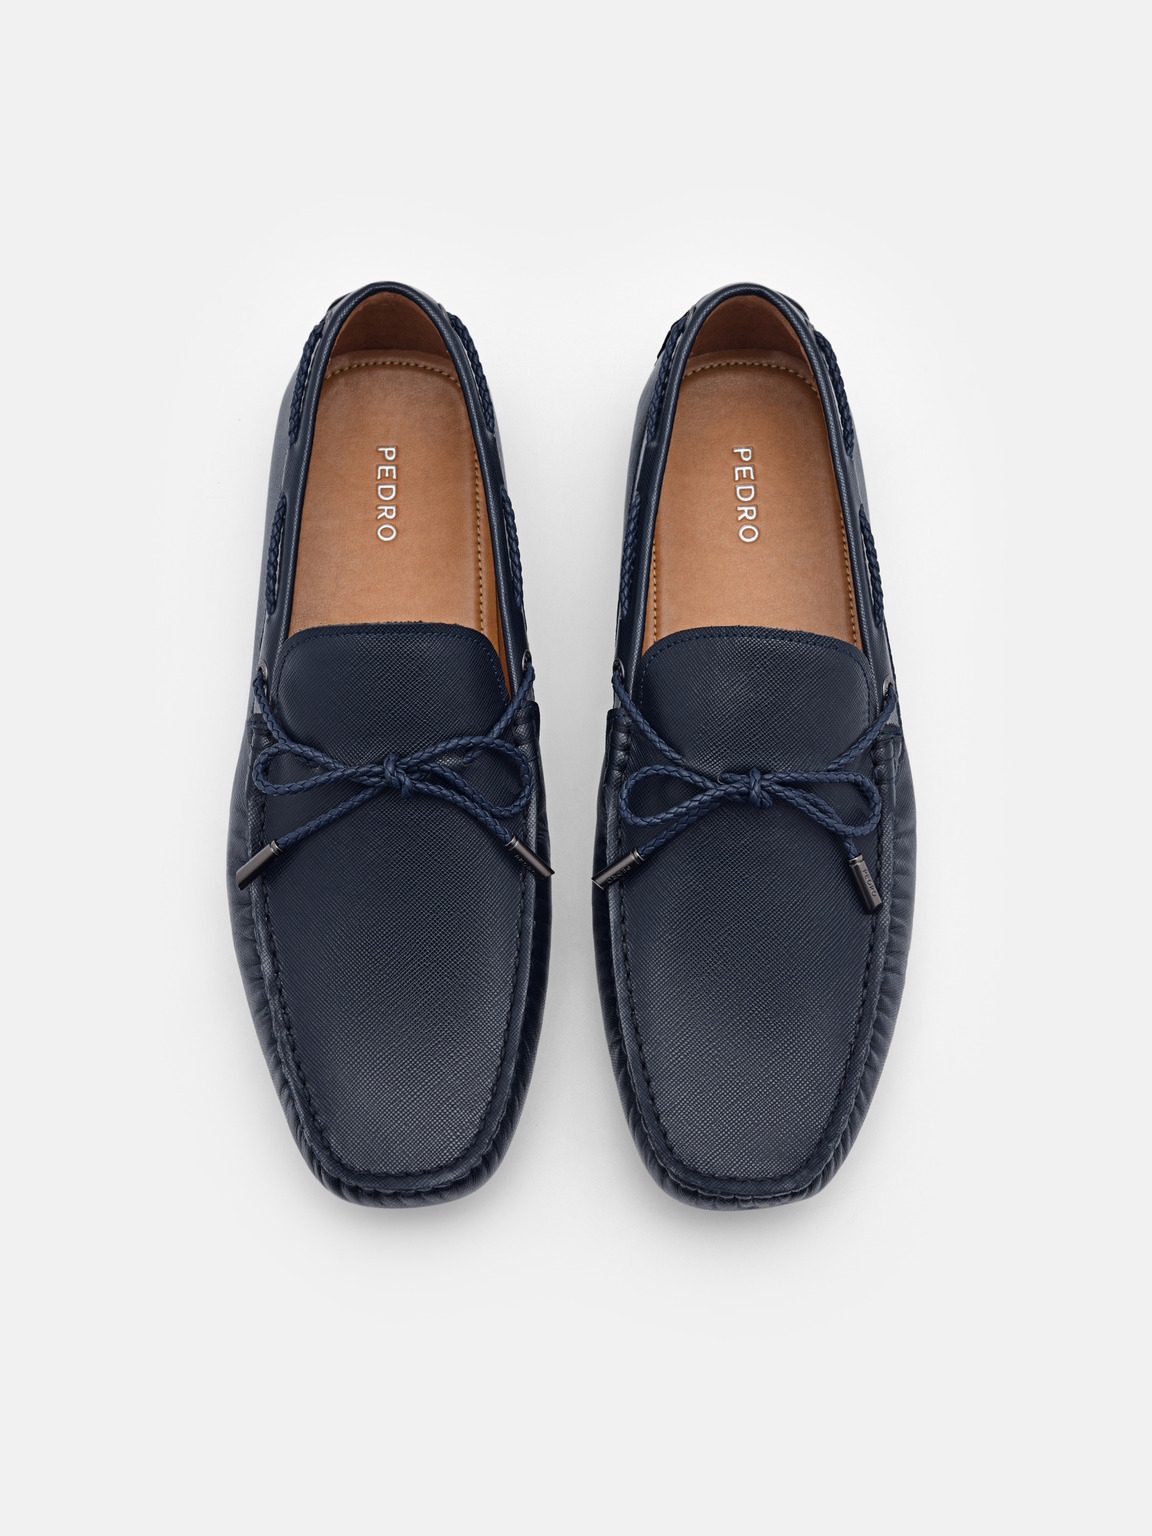 Leather Bow Driving Shoes, Navy